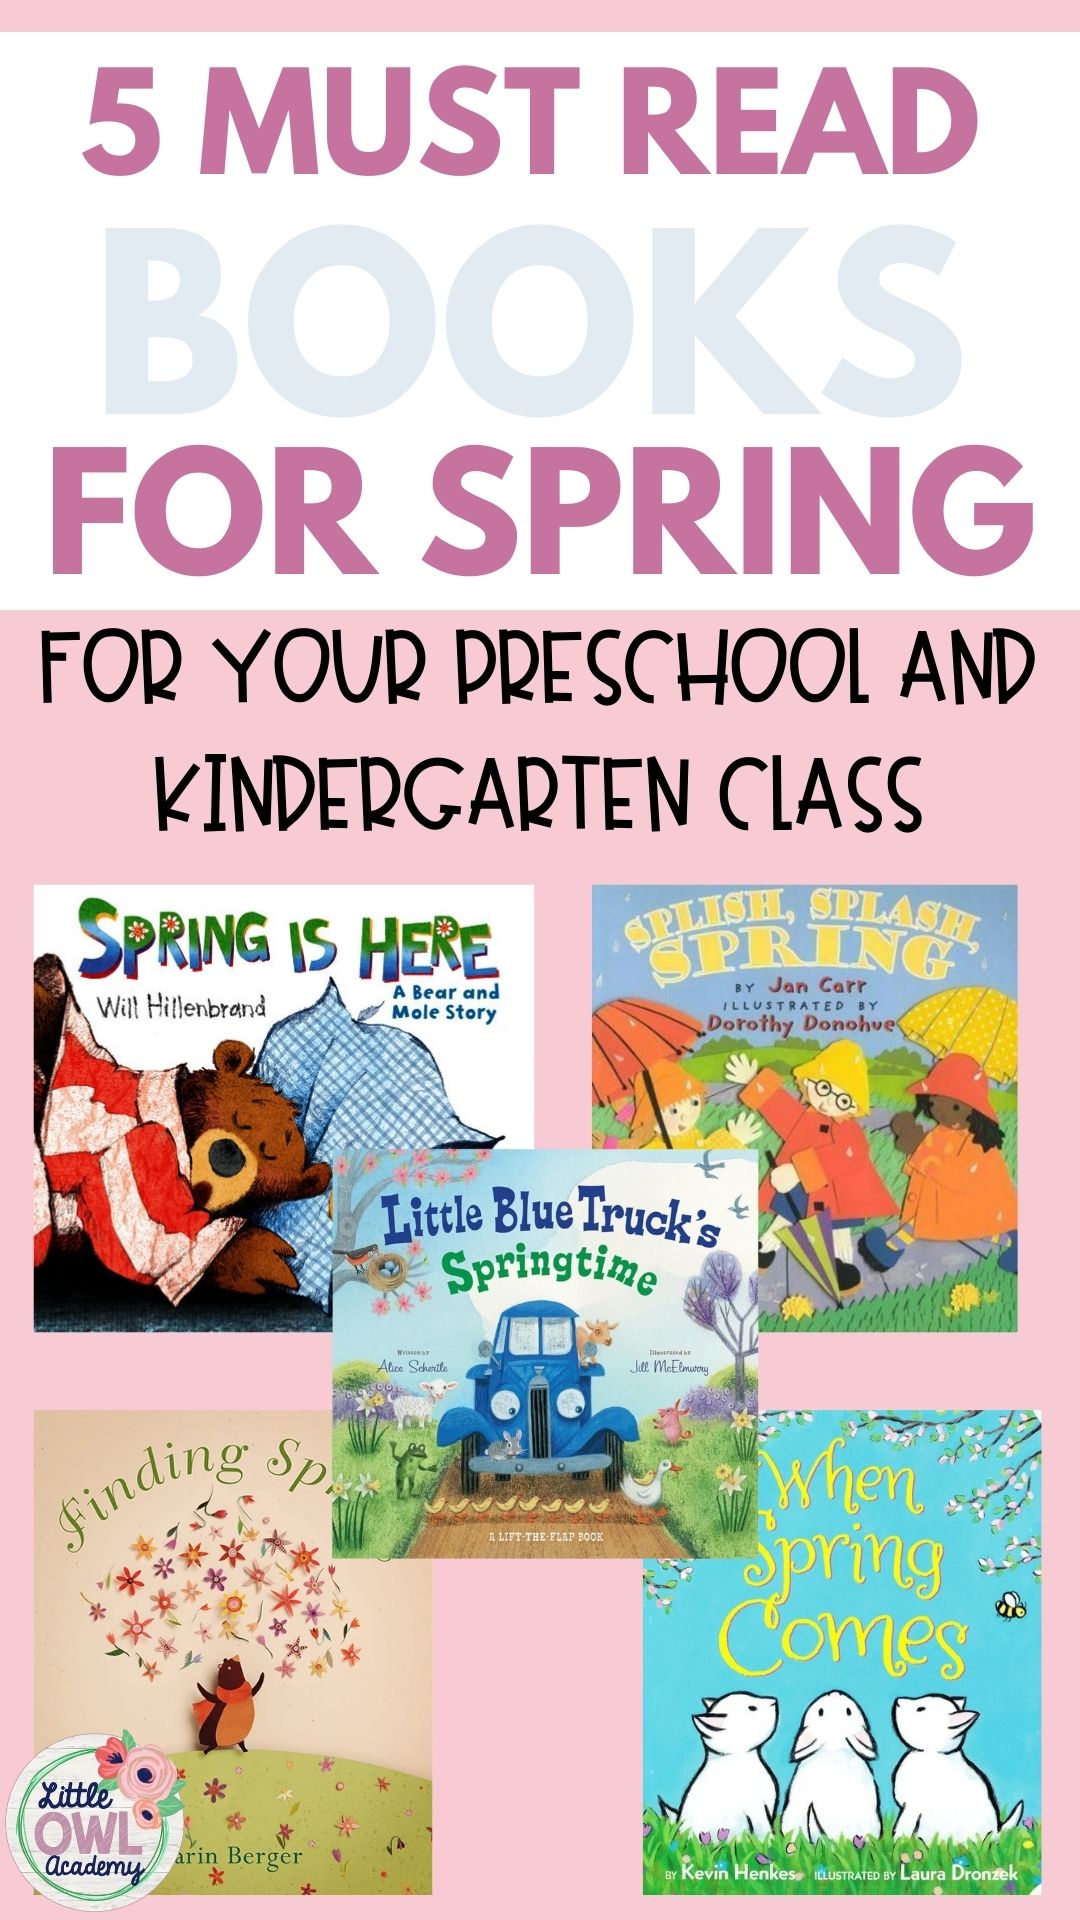 5-must-read-books-for-preschool-and-kindergarten-this-spring-little